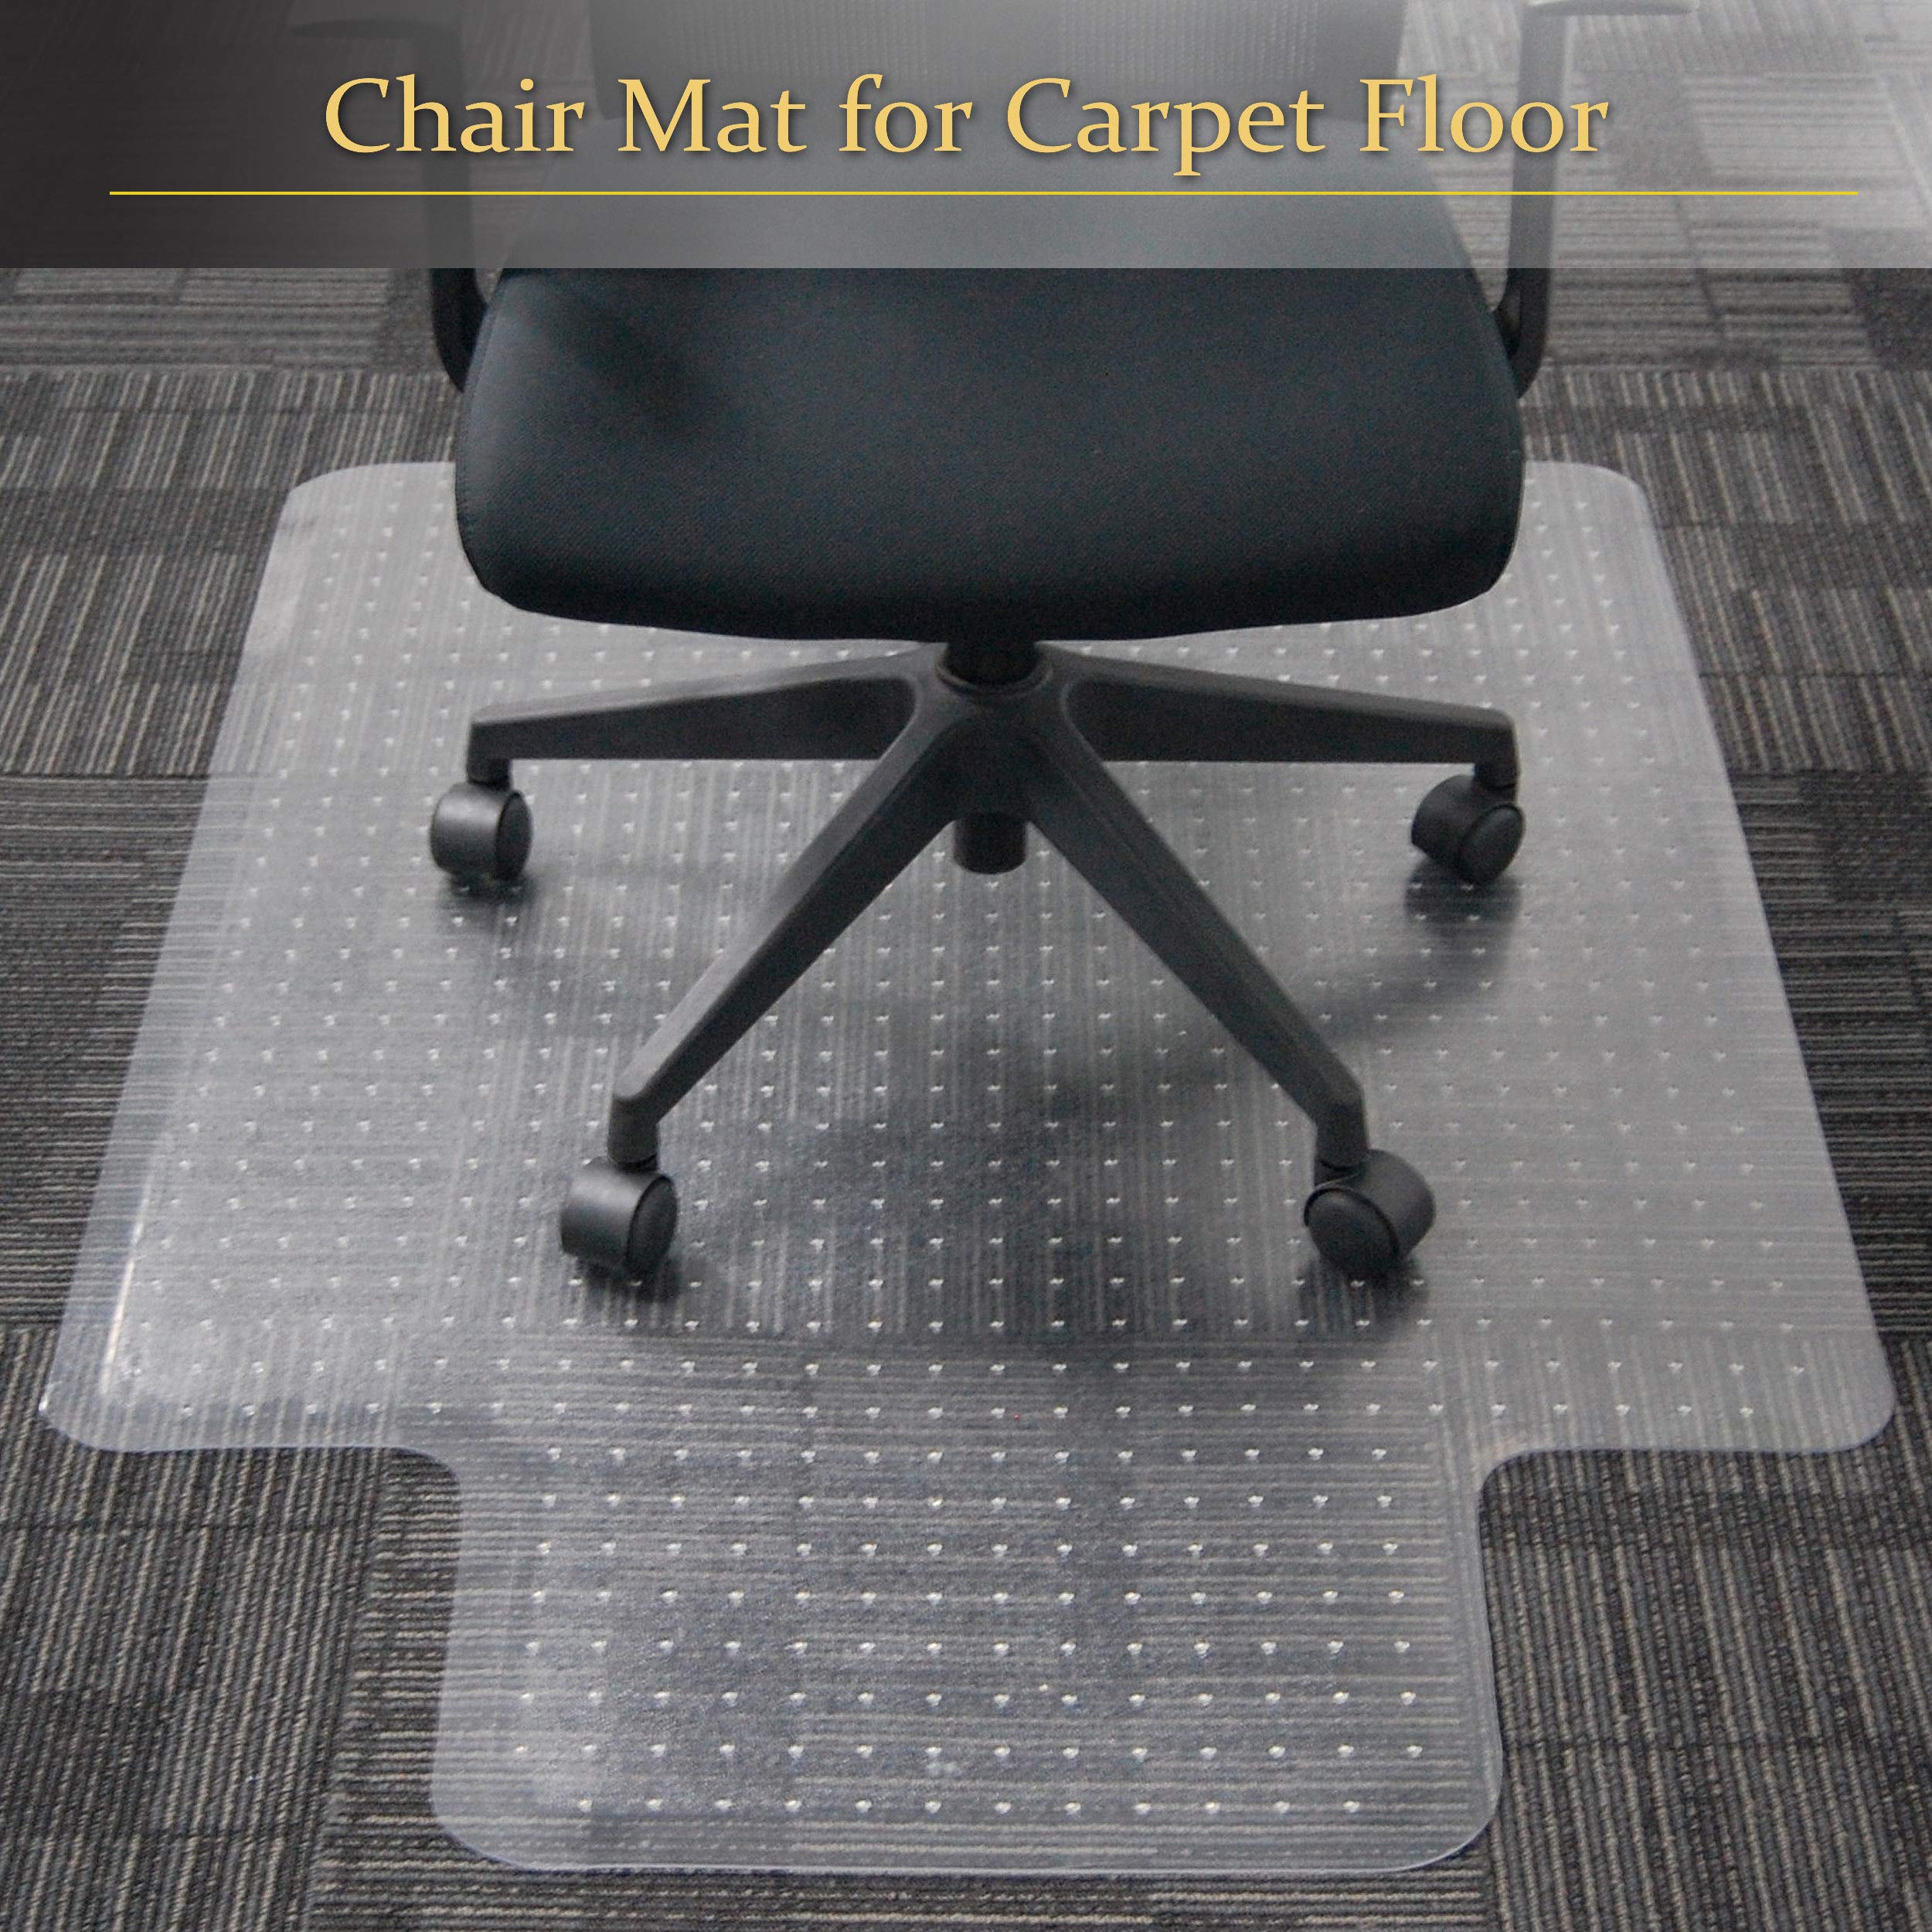 Sillamate Plastic Office Chair Mat for Carpeted Floors, 36'' x 48'' Heavy Duty Floor Mat, Eco-Friendly Series Studded Carpet Desk Chair Mats (36 inches X 48 inches)